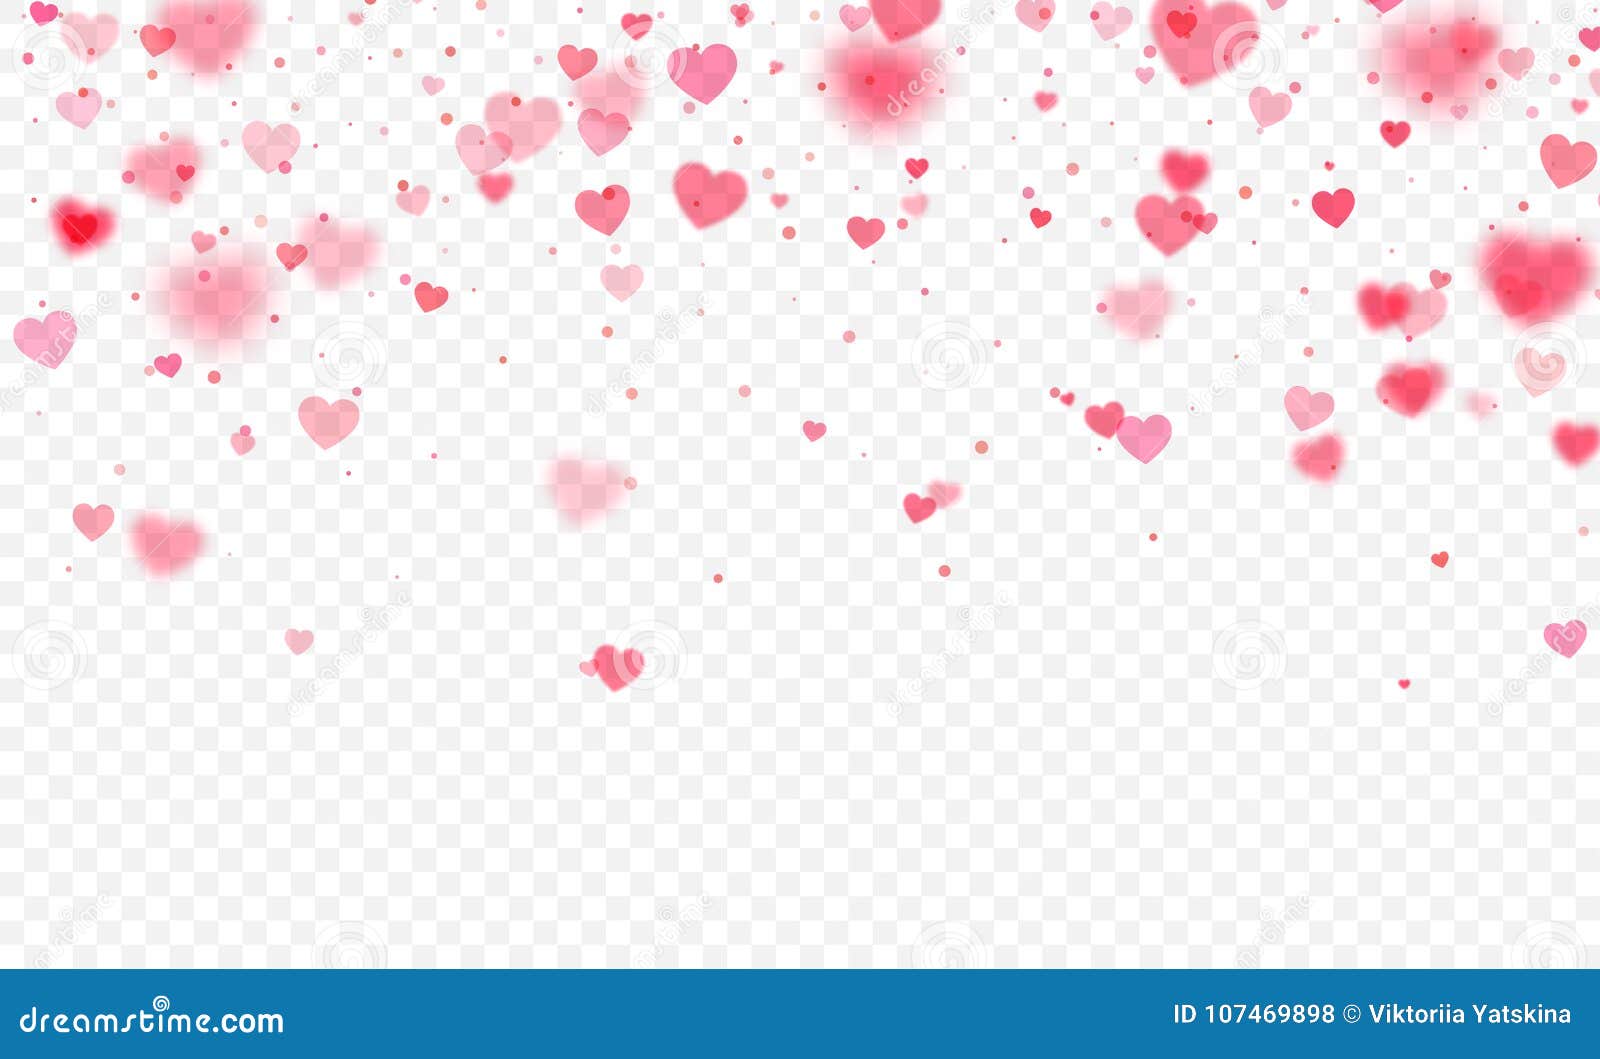 heart confetti falling on transparent background. valentines day card template.  